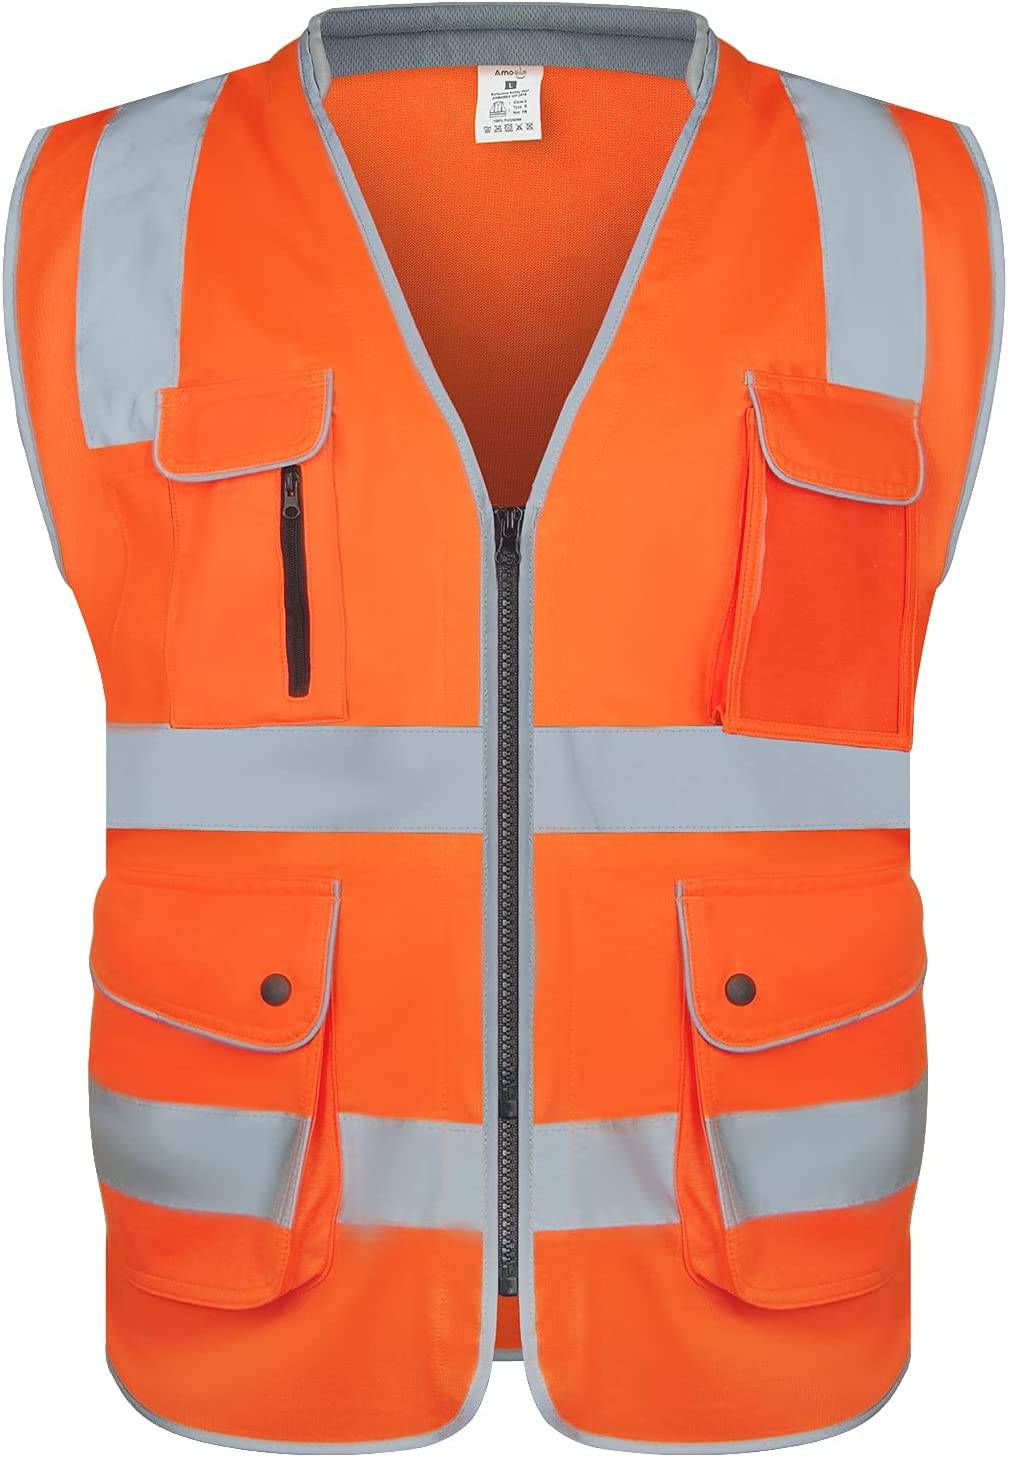 High Visibility Reflective Safety Vest with Pocket